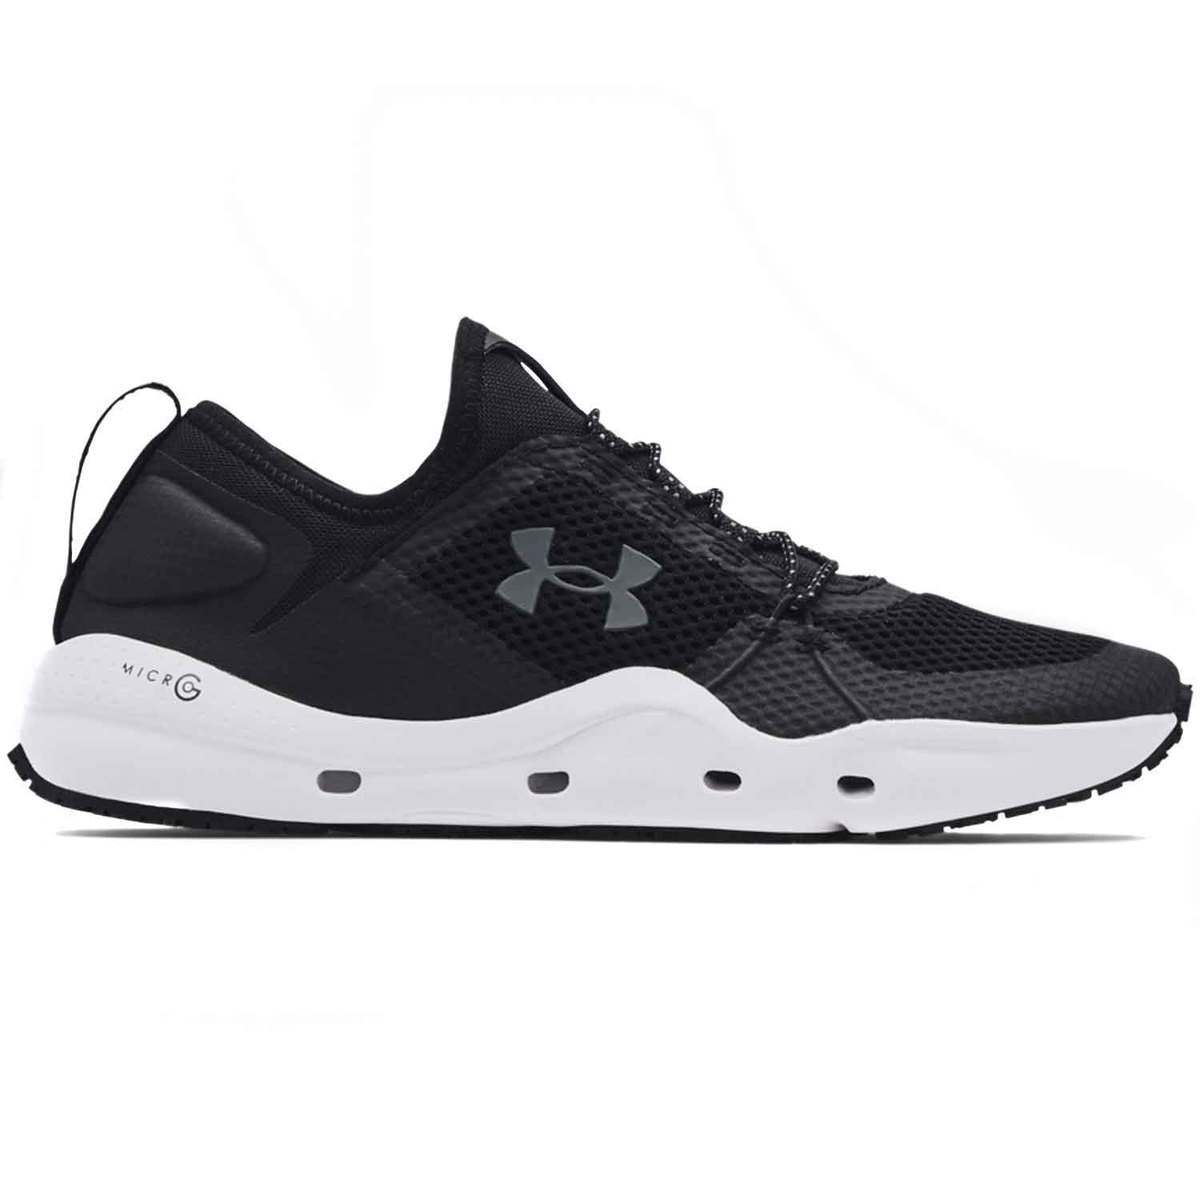 Under Armour Men's Micro G Kilchis Fishing Water Shoes